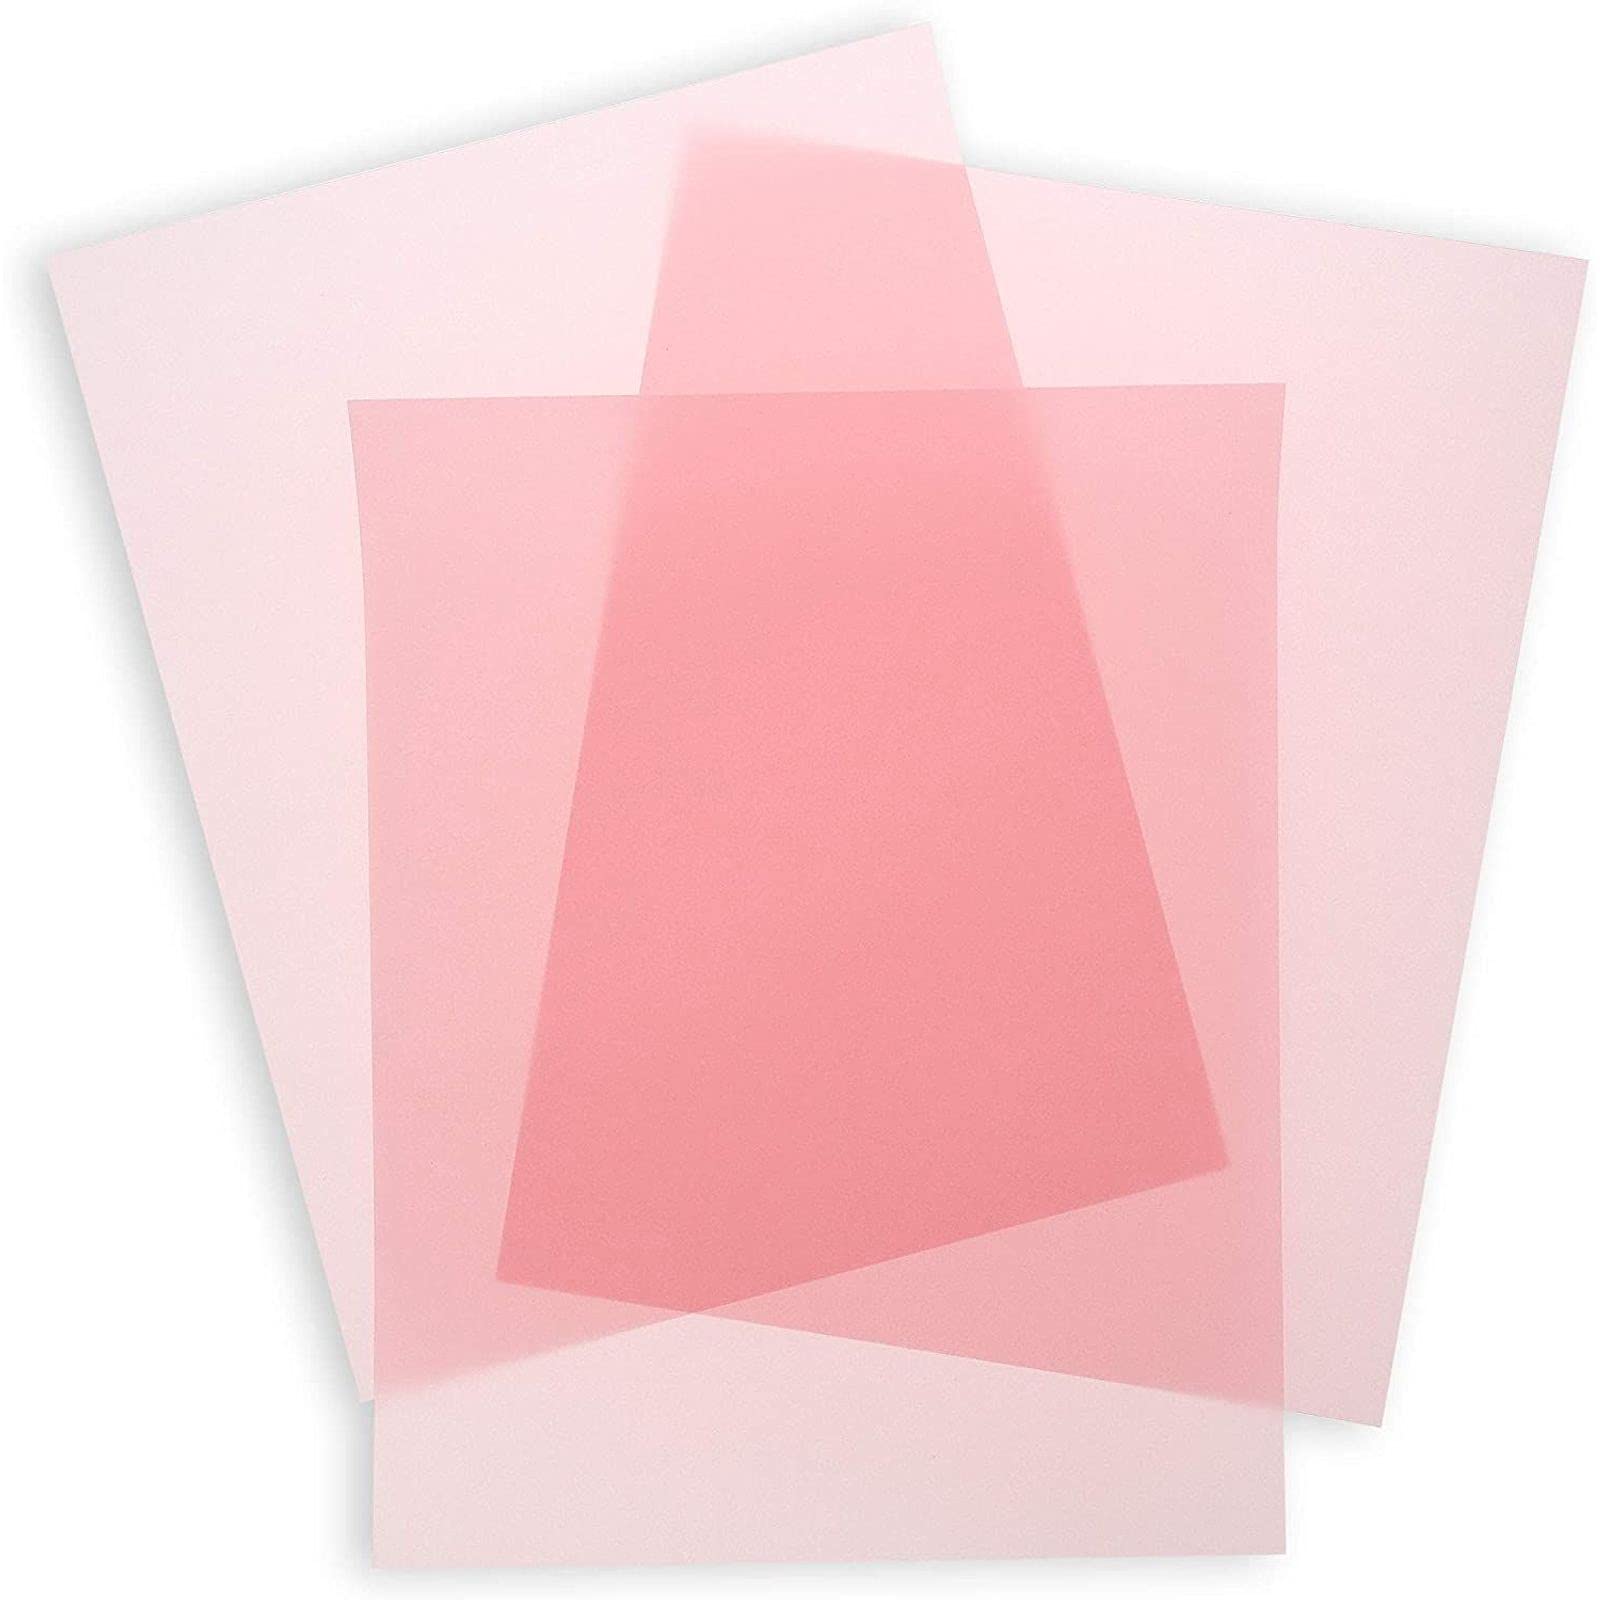 Vellum Paper for Invitations and Tracing (8.5 x 11 in, 5 Colors